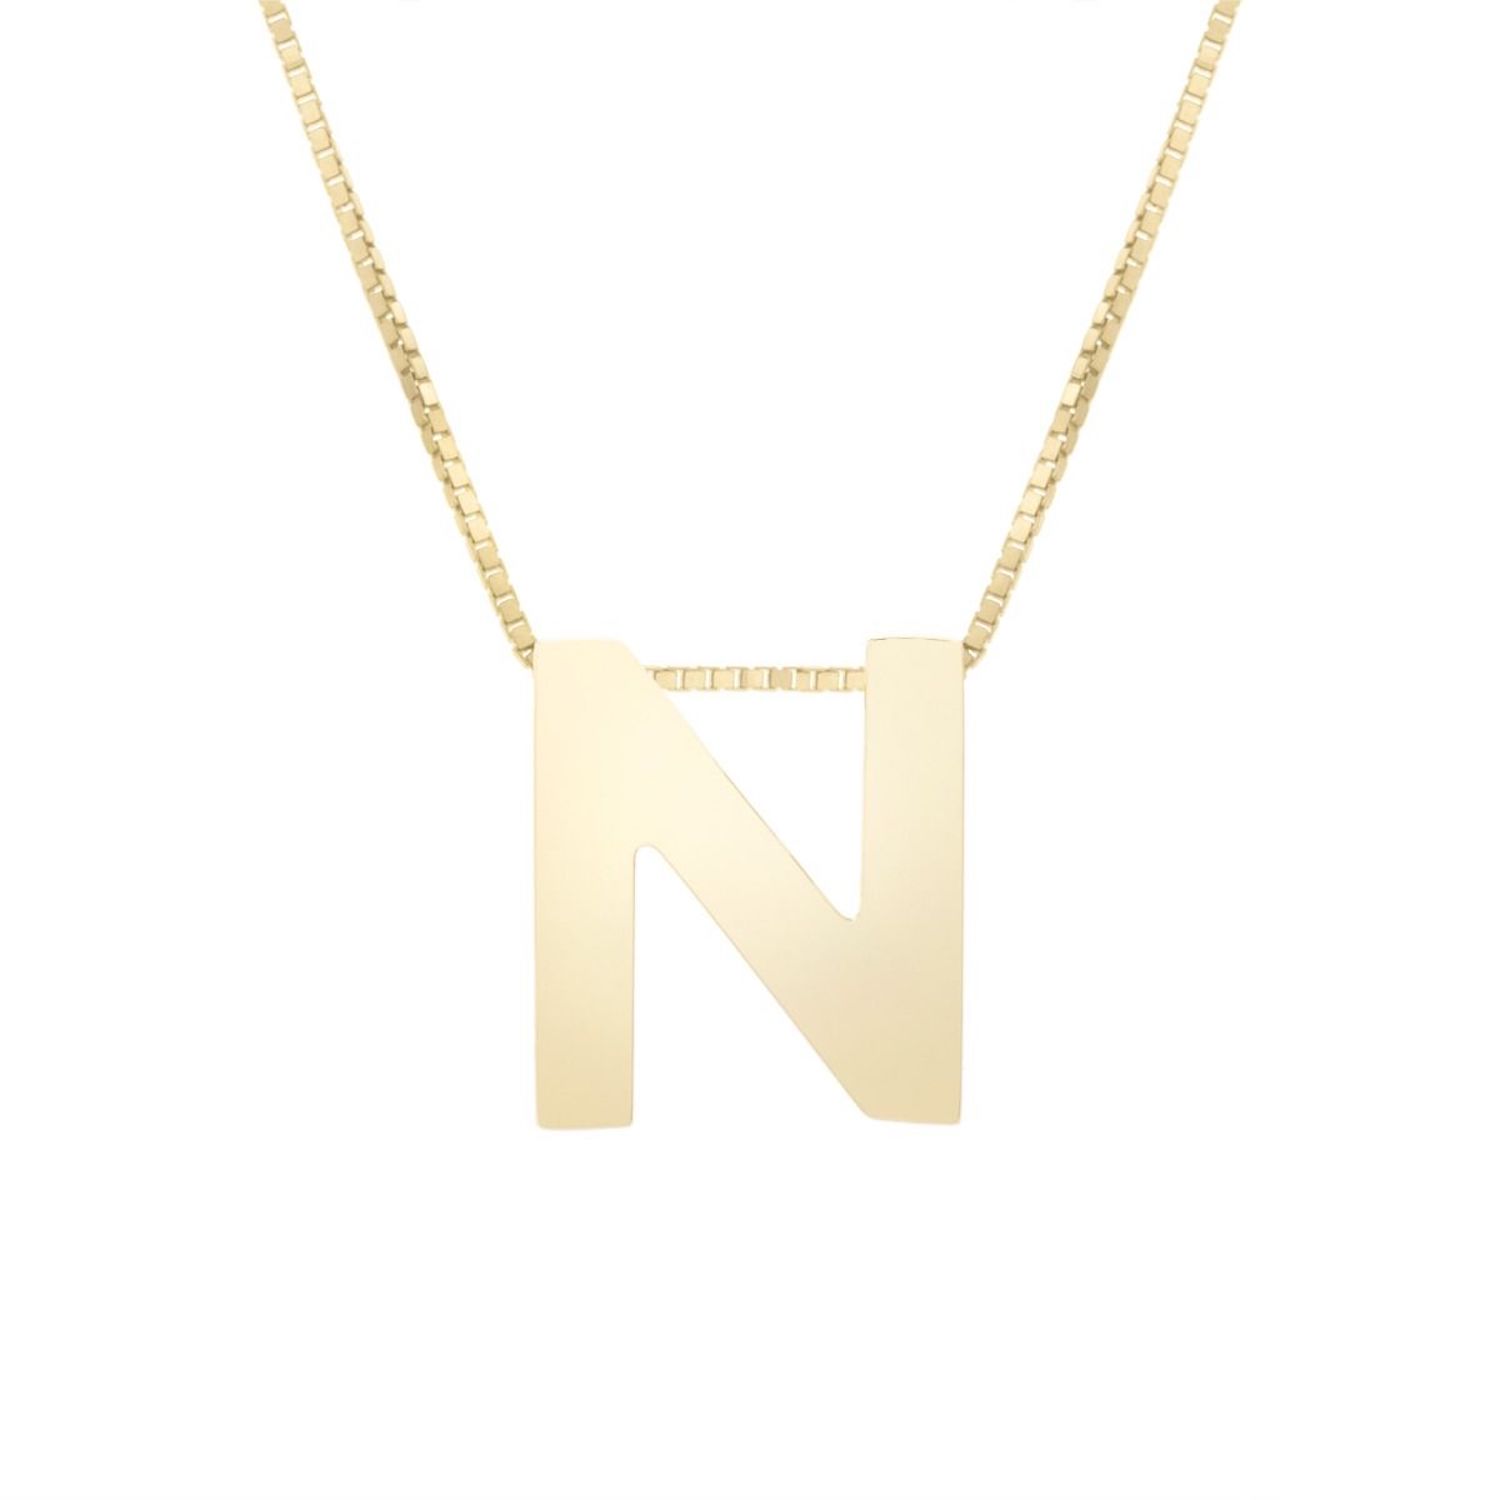 14K Yellow Gold Block Letter Initial Pendant Box Chain Necklace 16"-18" - N